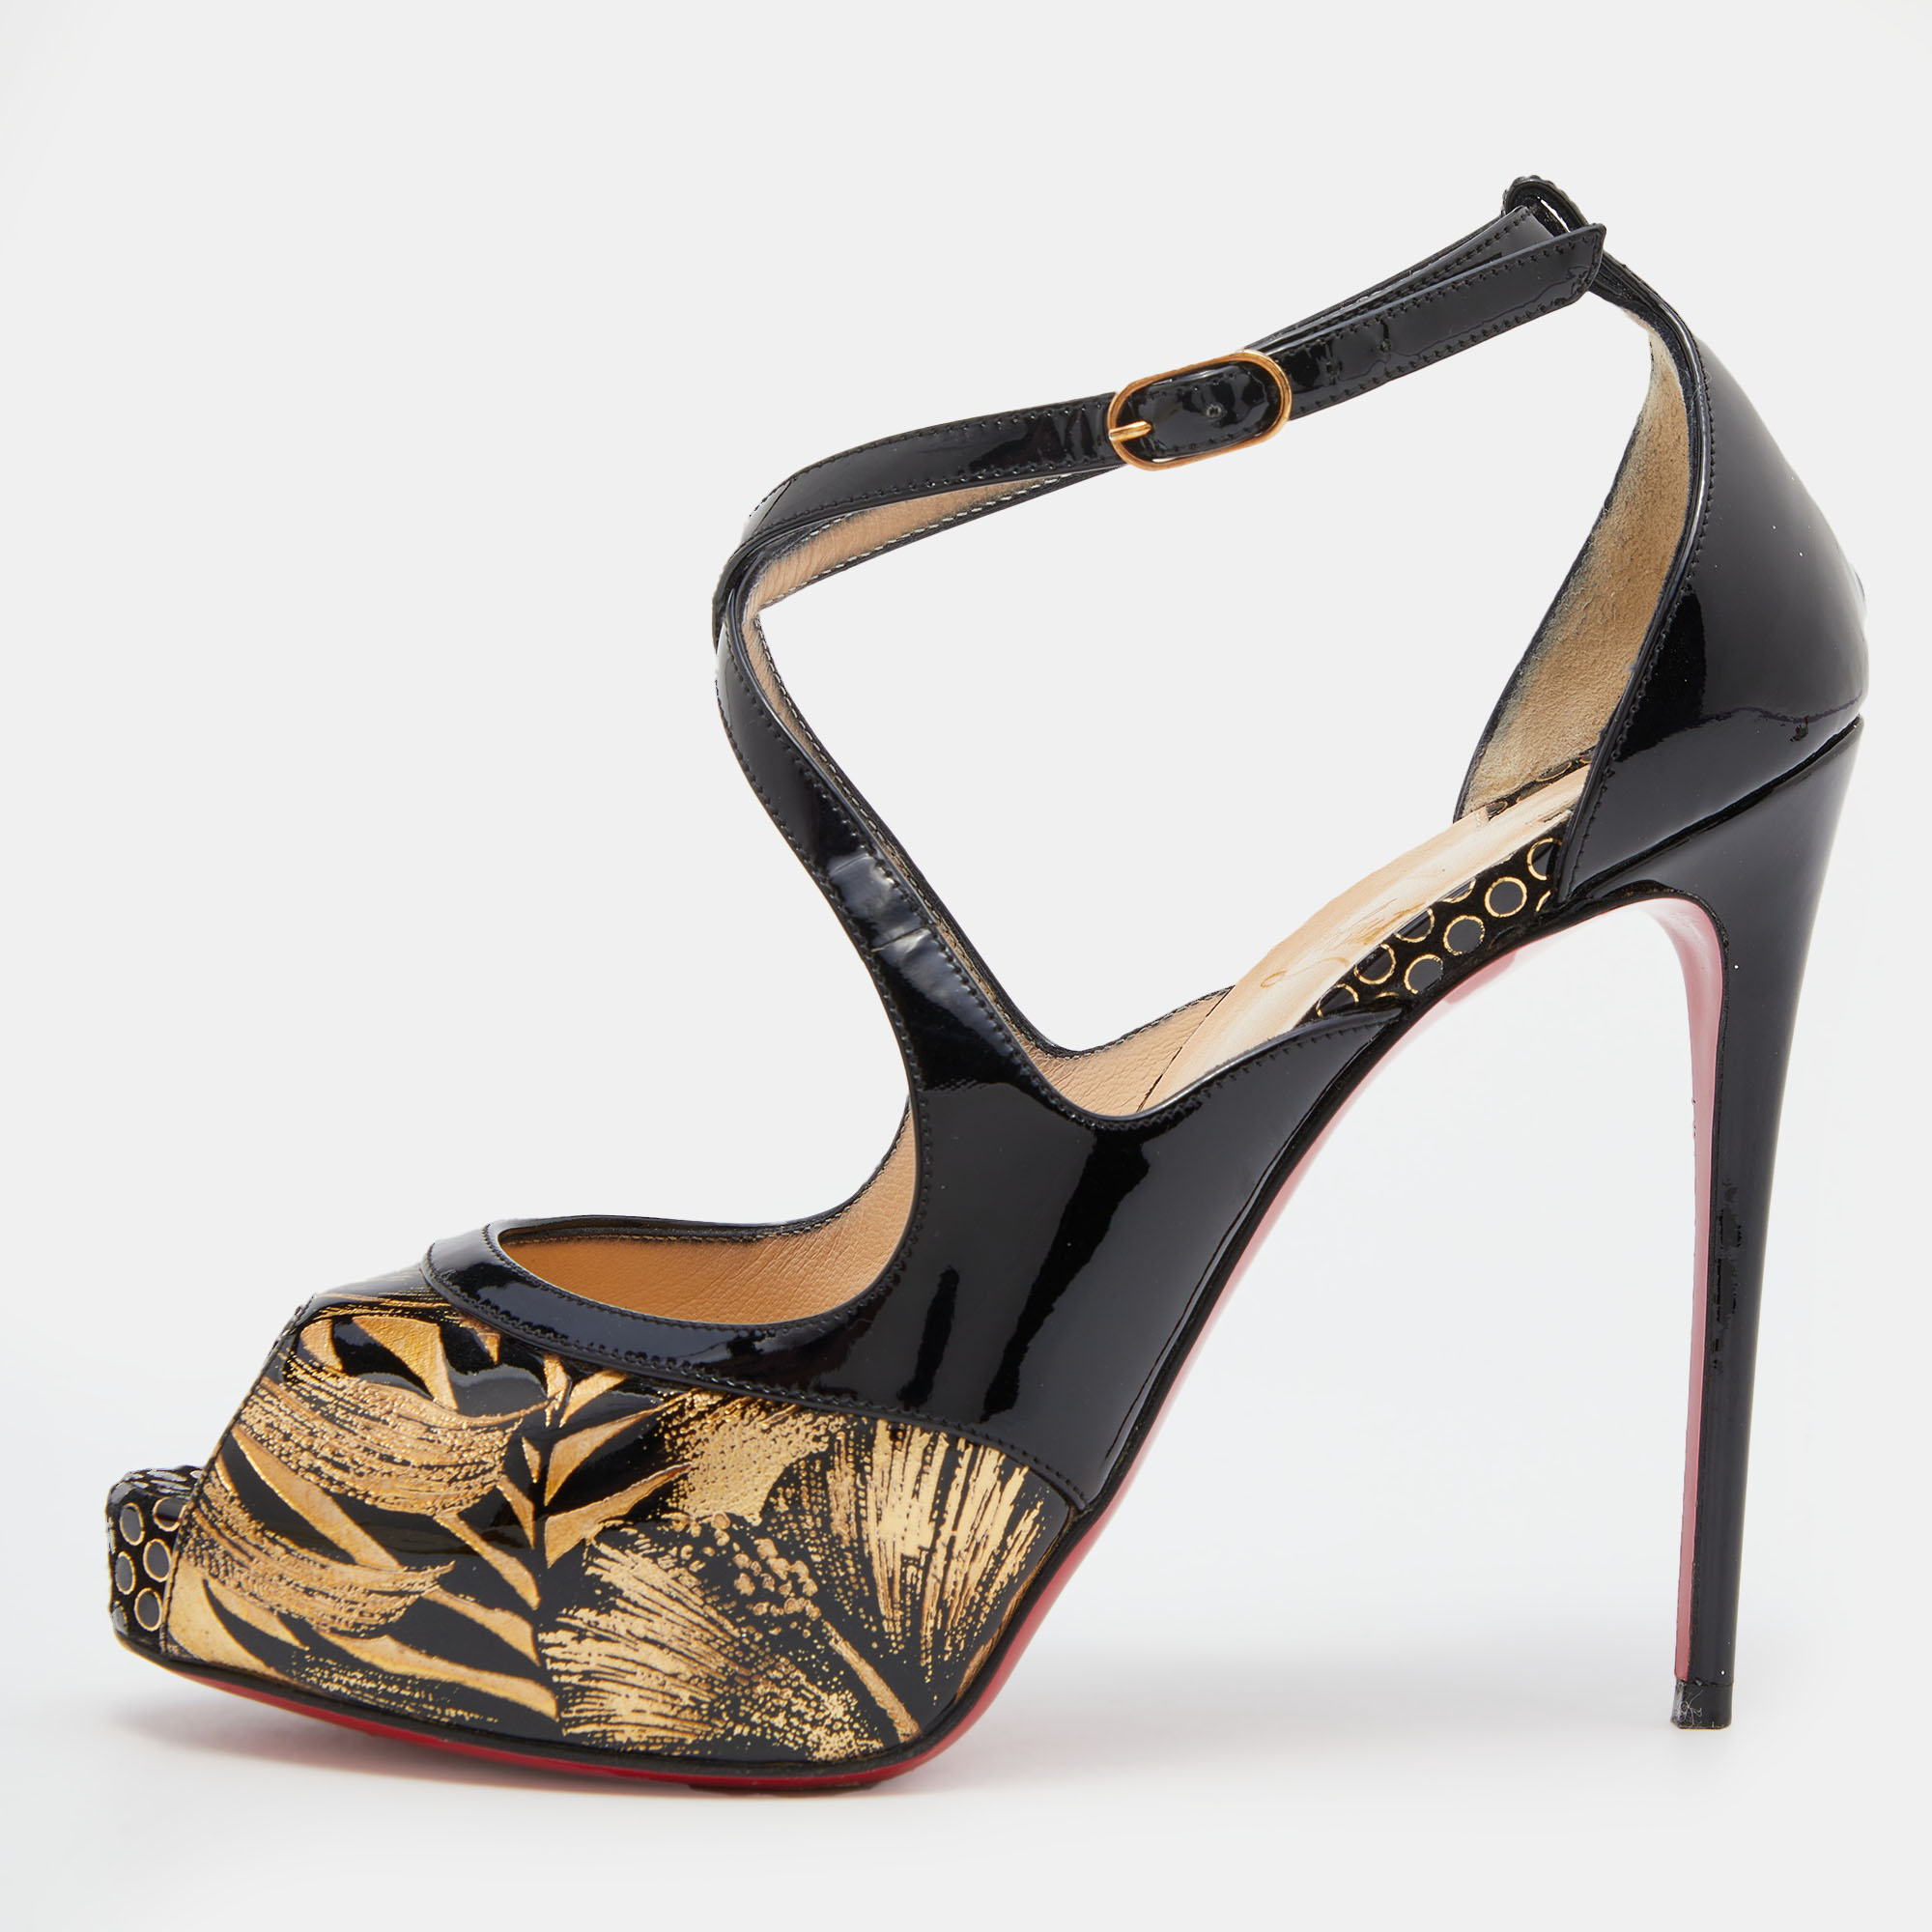 Pre-owned Christian Louboutin Black/gold Patent Leather Criss Cross Peep Toe Platform Sandals Size 36